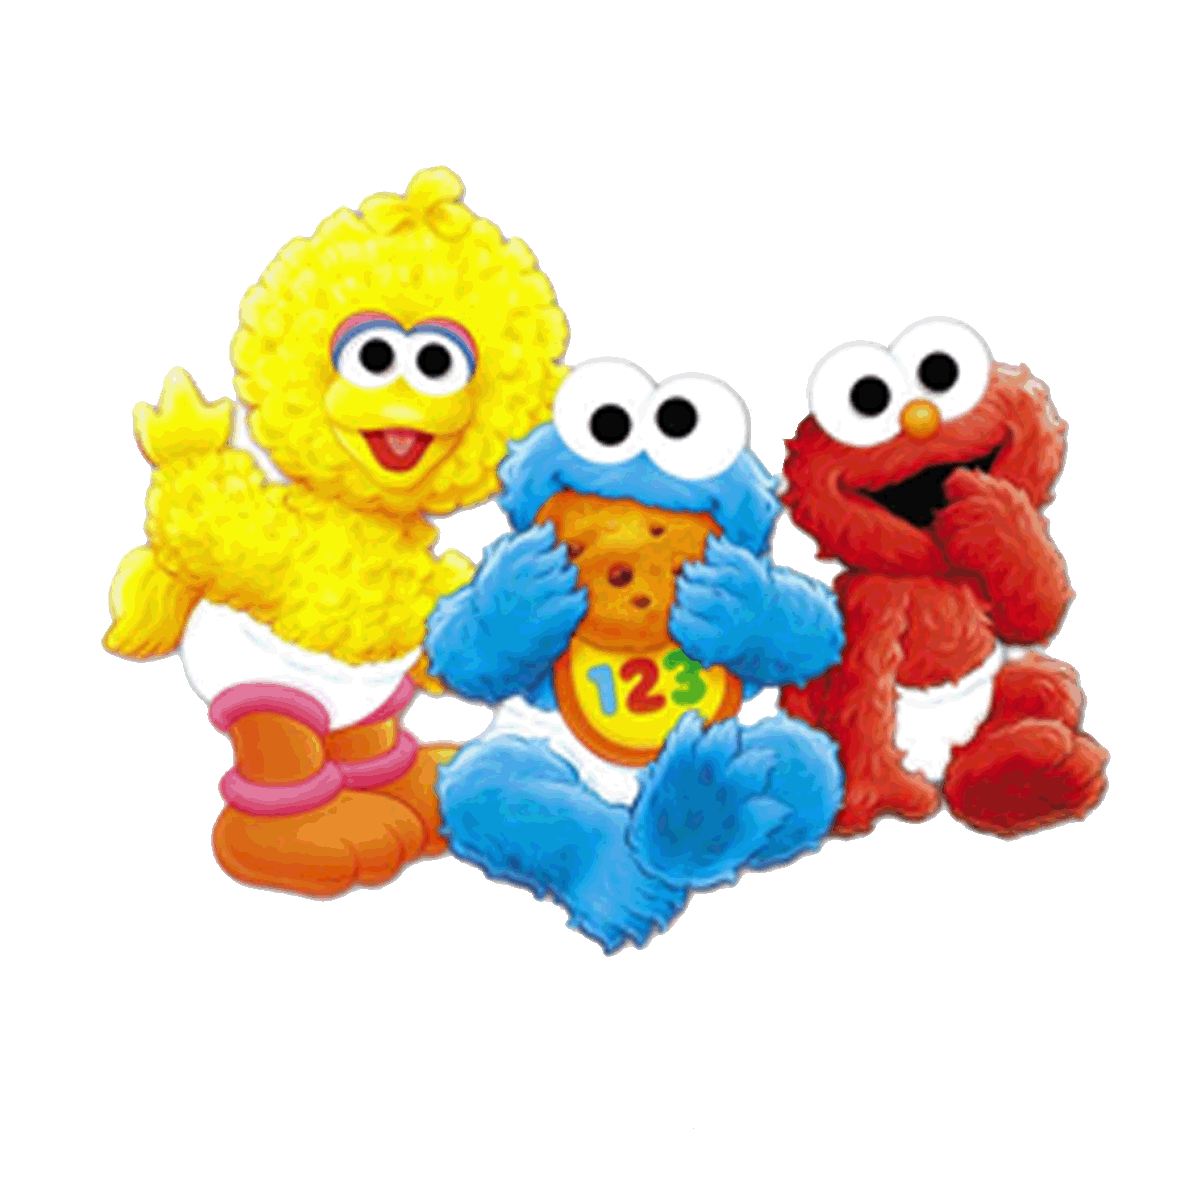 Cookie monster as a. Number 2 clipart elmo